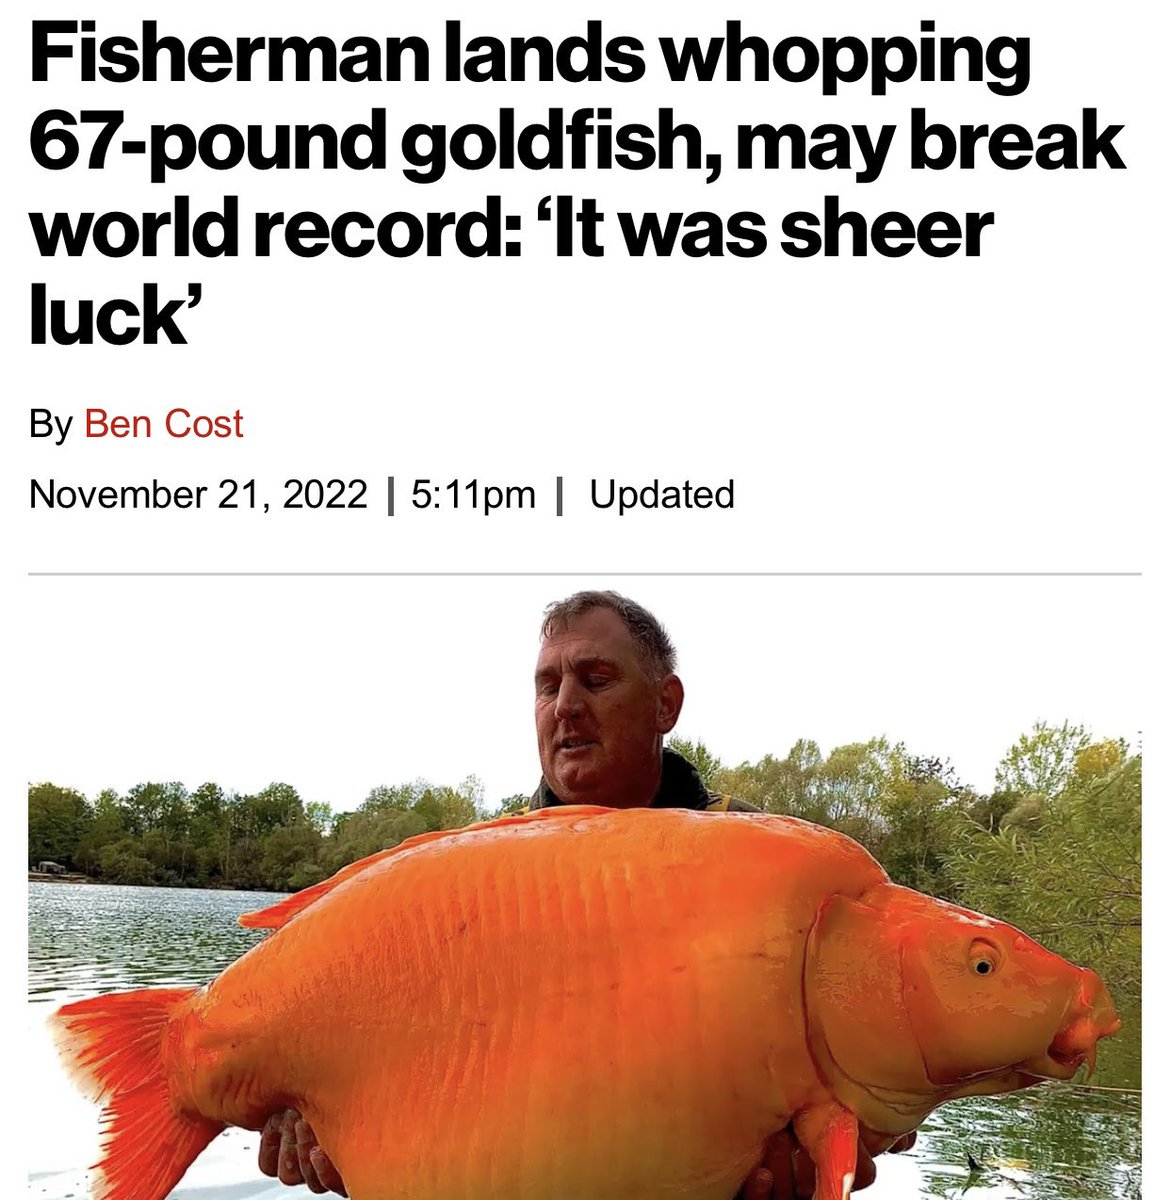 dudes posting their w's - giant goldfish caught - Fisherman lands whopping 67pound goldfish, may break world record 'It was sheer luck' By Ben Cost | pm | Updated